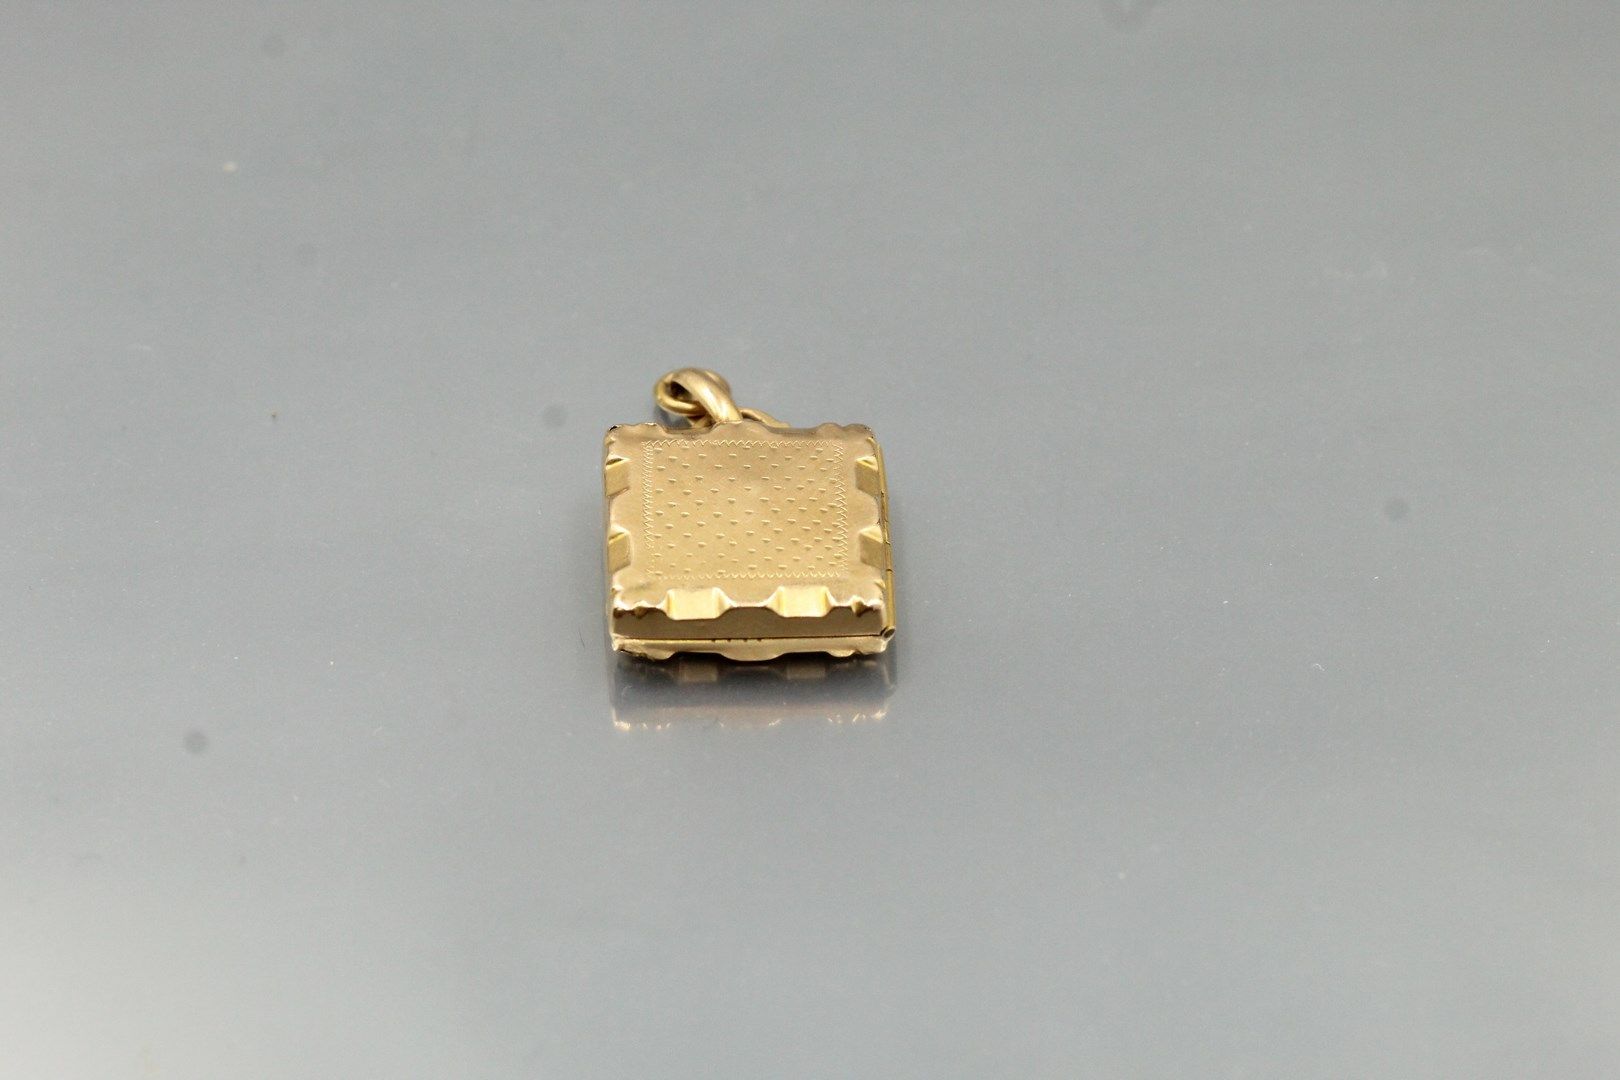 Null 18k (750) yellow gold pendant with chased motif.

Gross weight: 8.14 g.